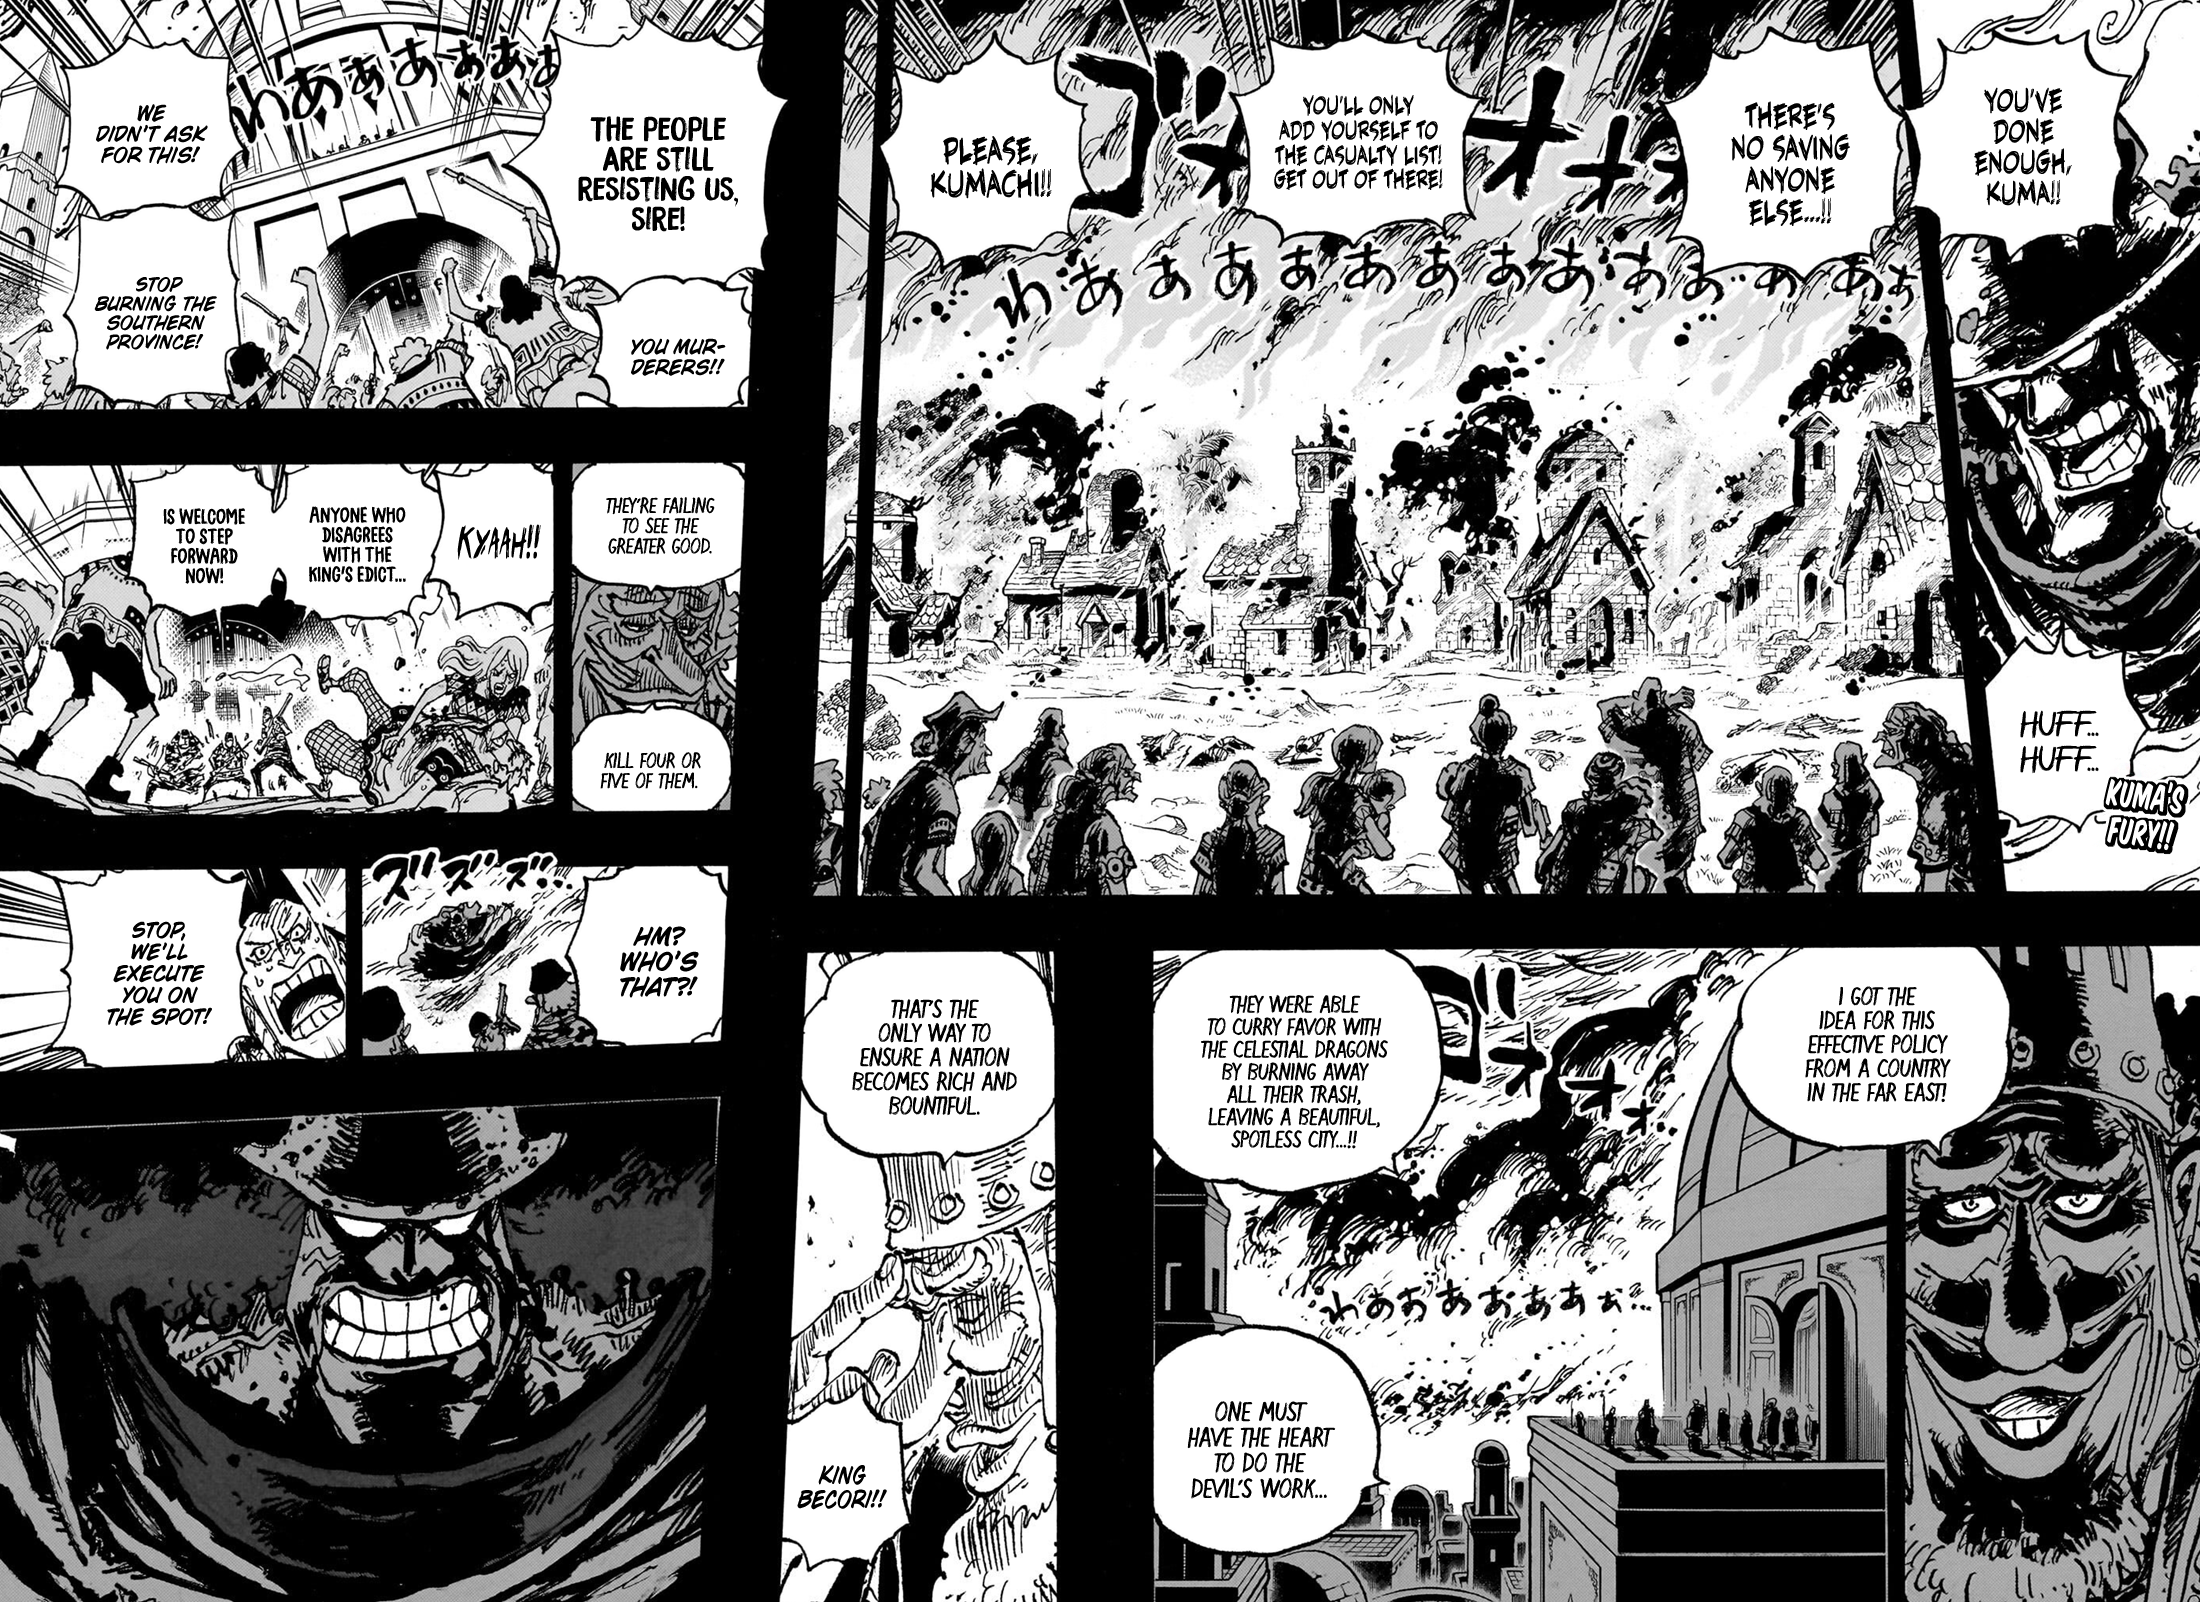 One Piece Chapter 1044 makes history as the most-viewed manga